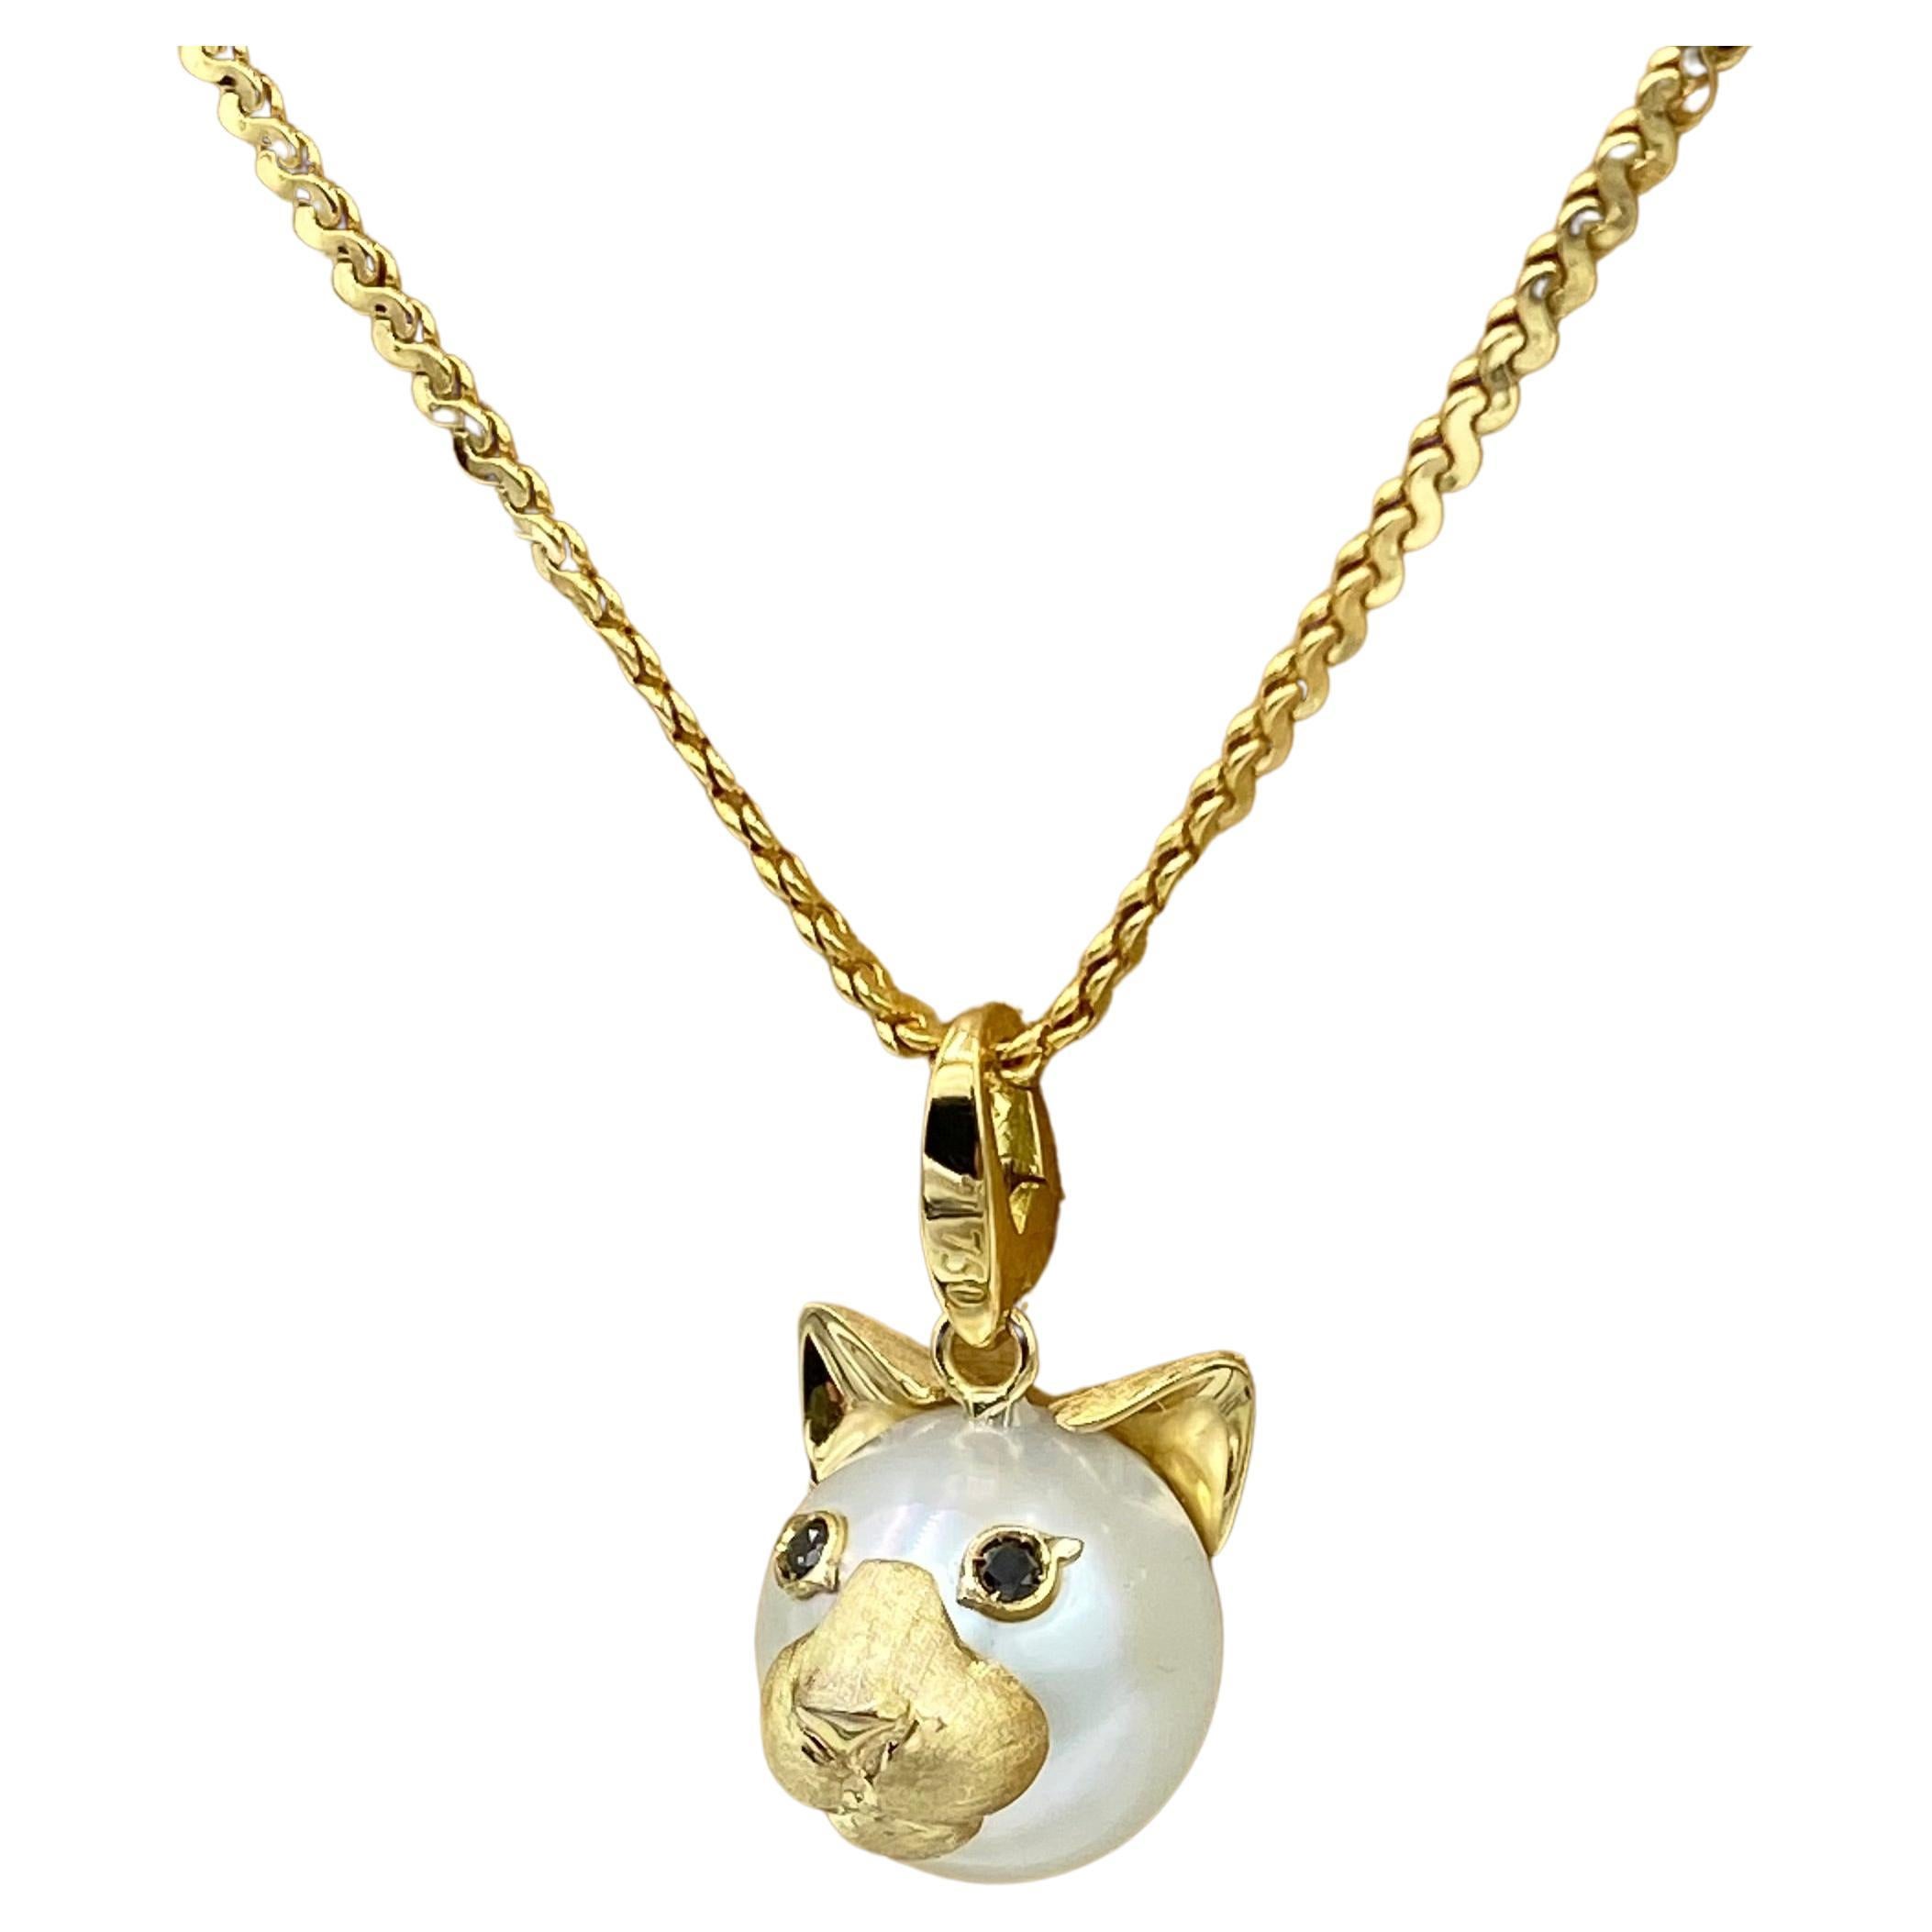 Cat Black Diamond 18 Kt Australian Pearl Charm or Pendant Necklace Made in Italy

The cat symbolizes curiosity, adventure and independence. It is an animal that has learned the art of patience and calm.

I use an Australian pearl to make a little